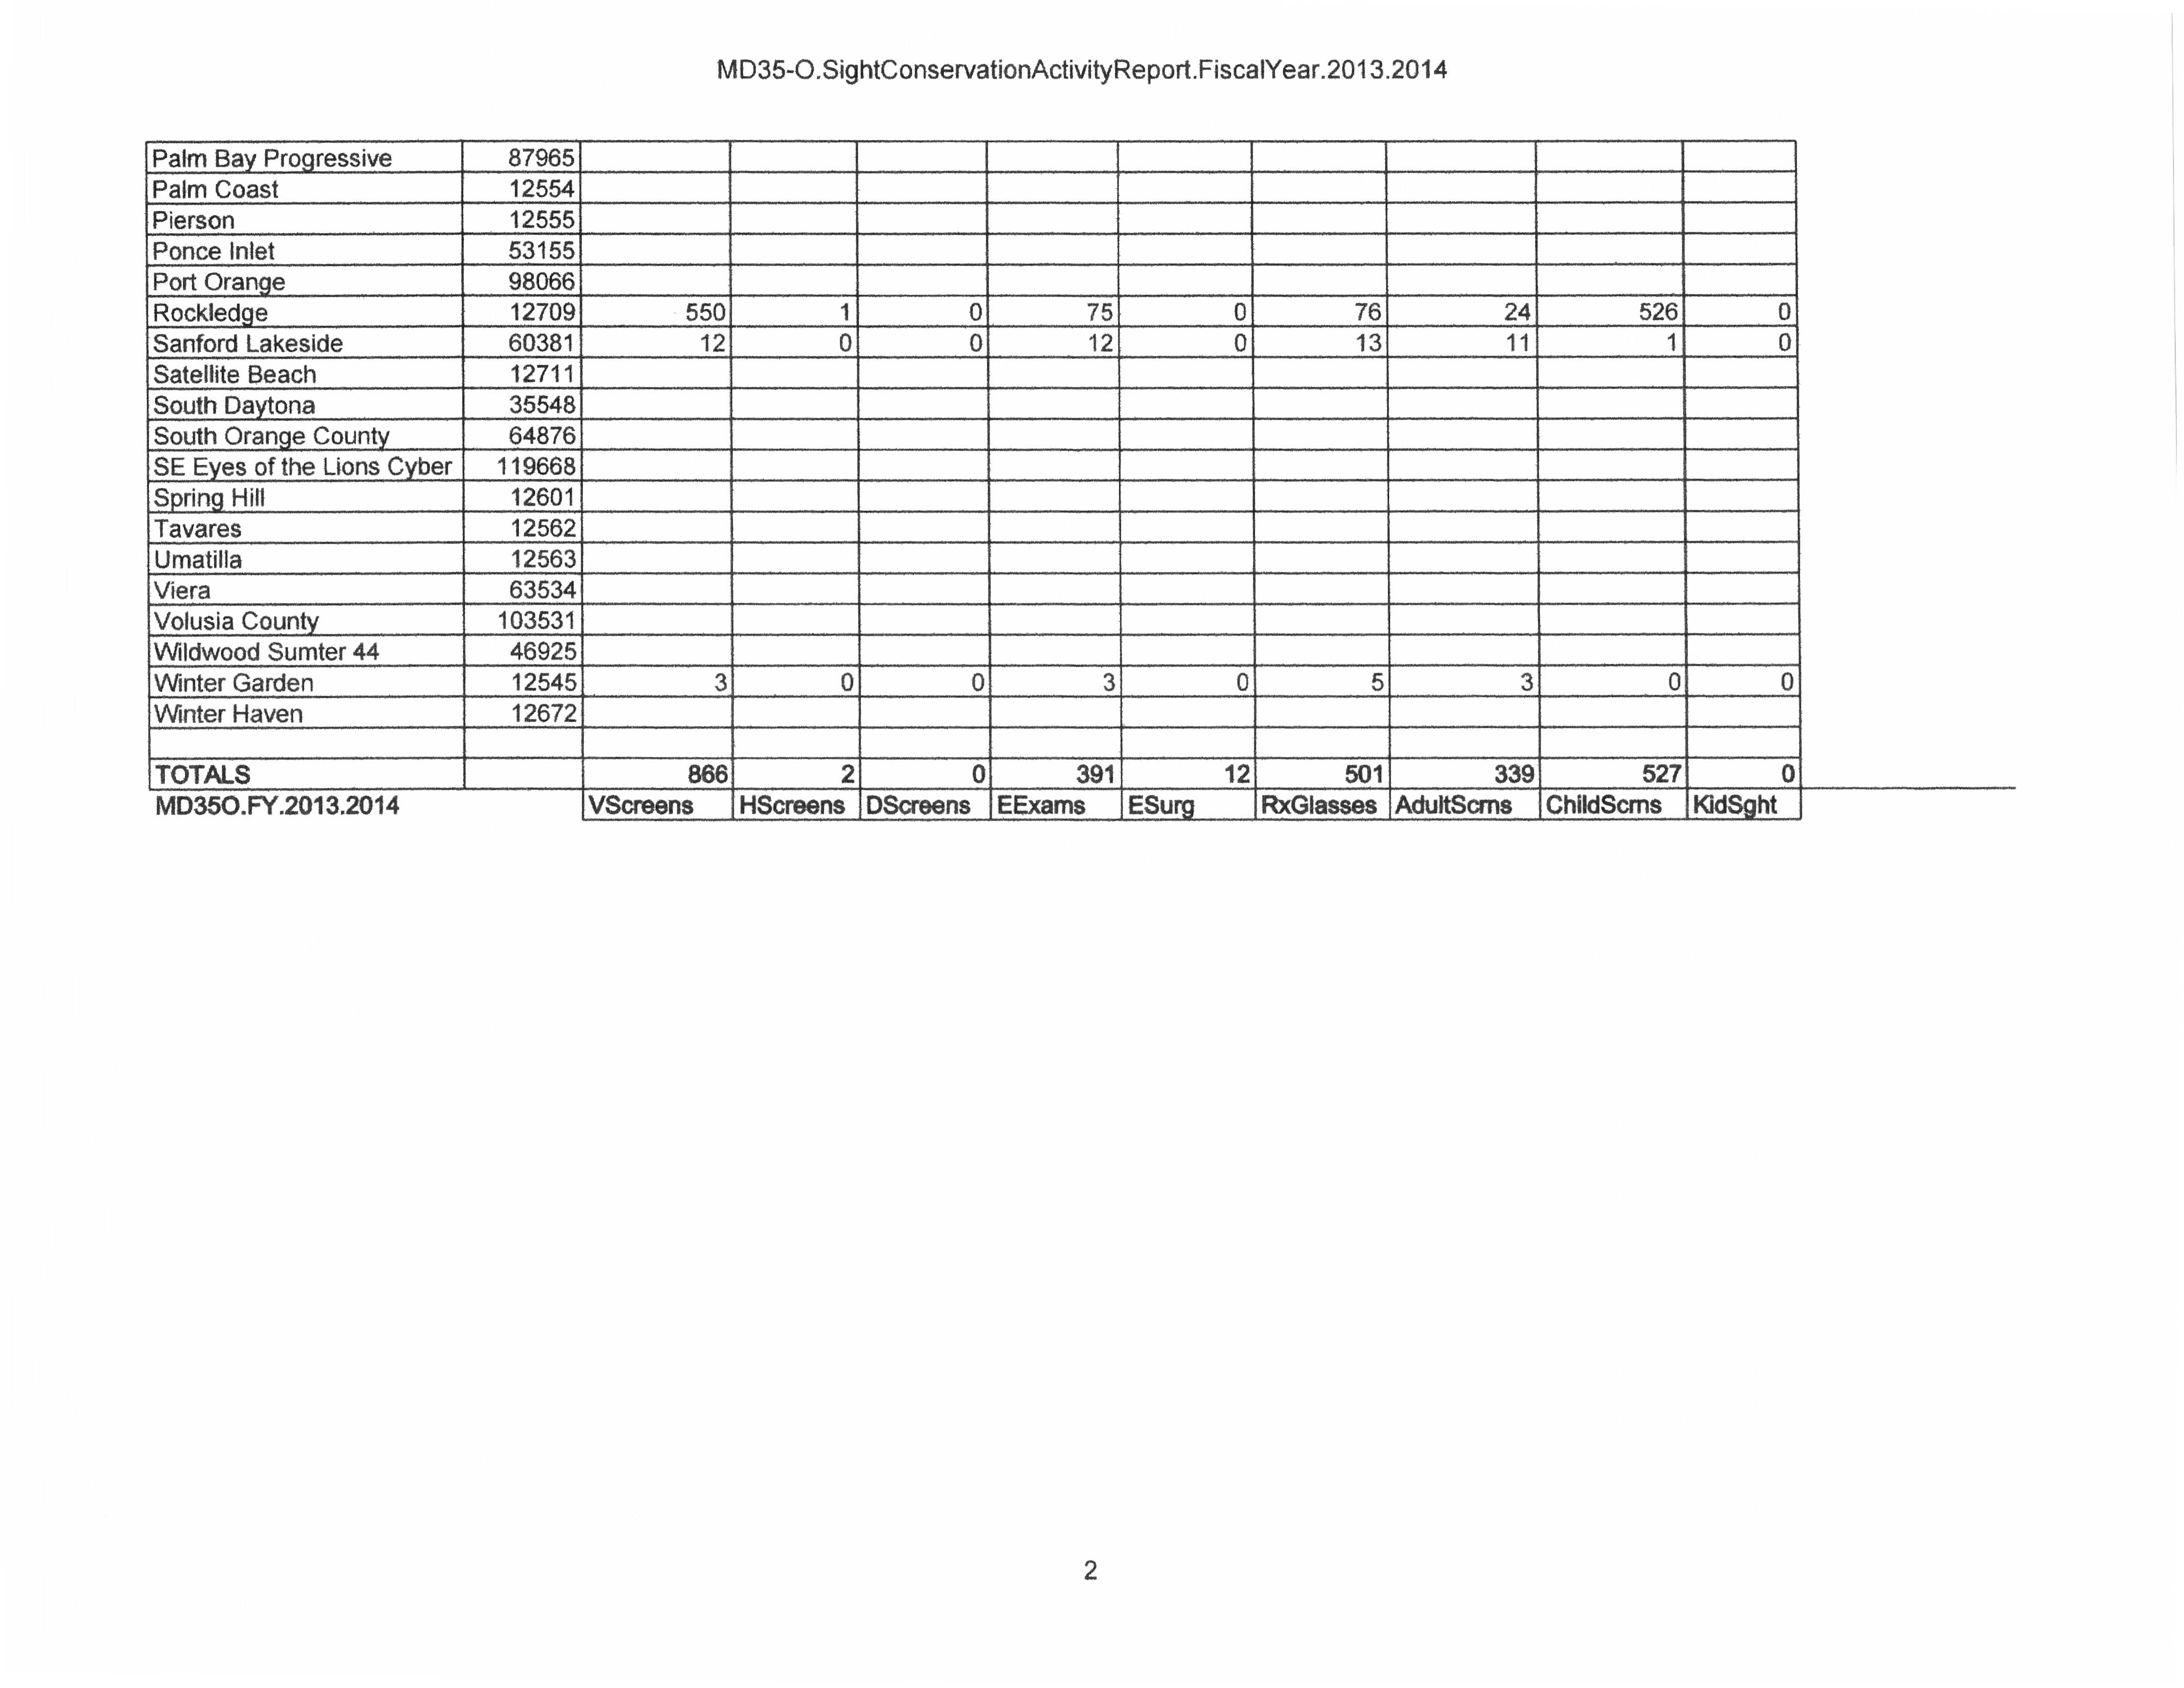 MD 35-O FY2013-2014 Sight Conservation Activity Report P2/2